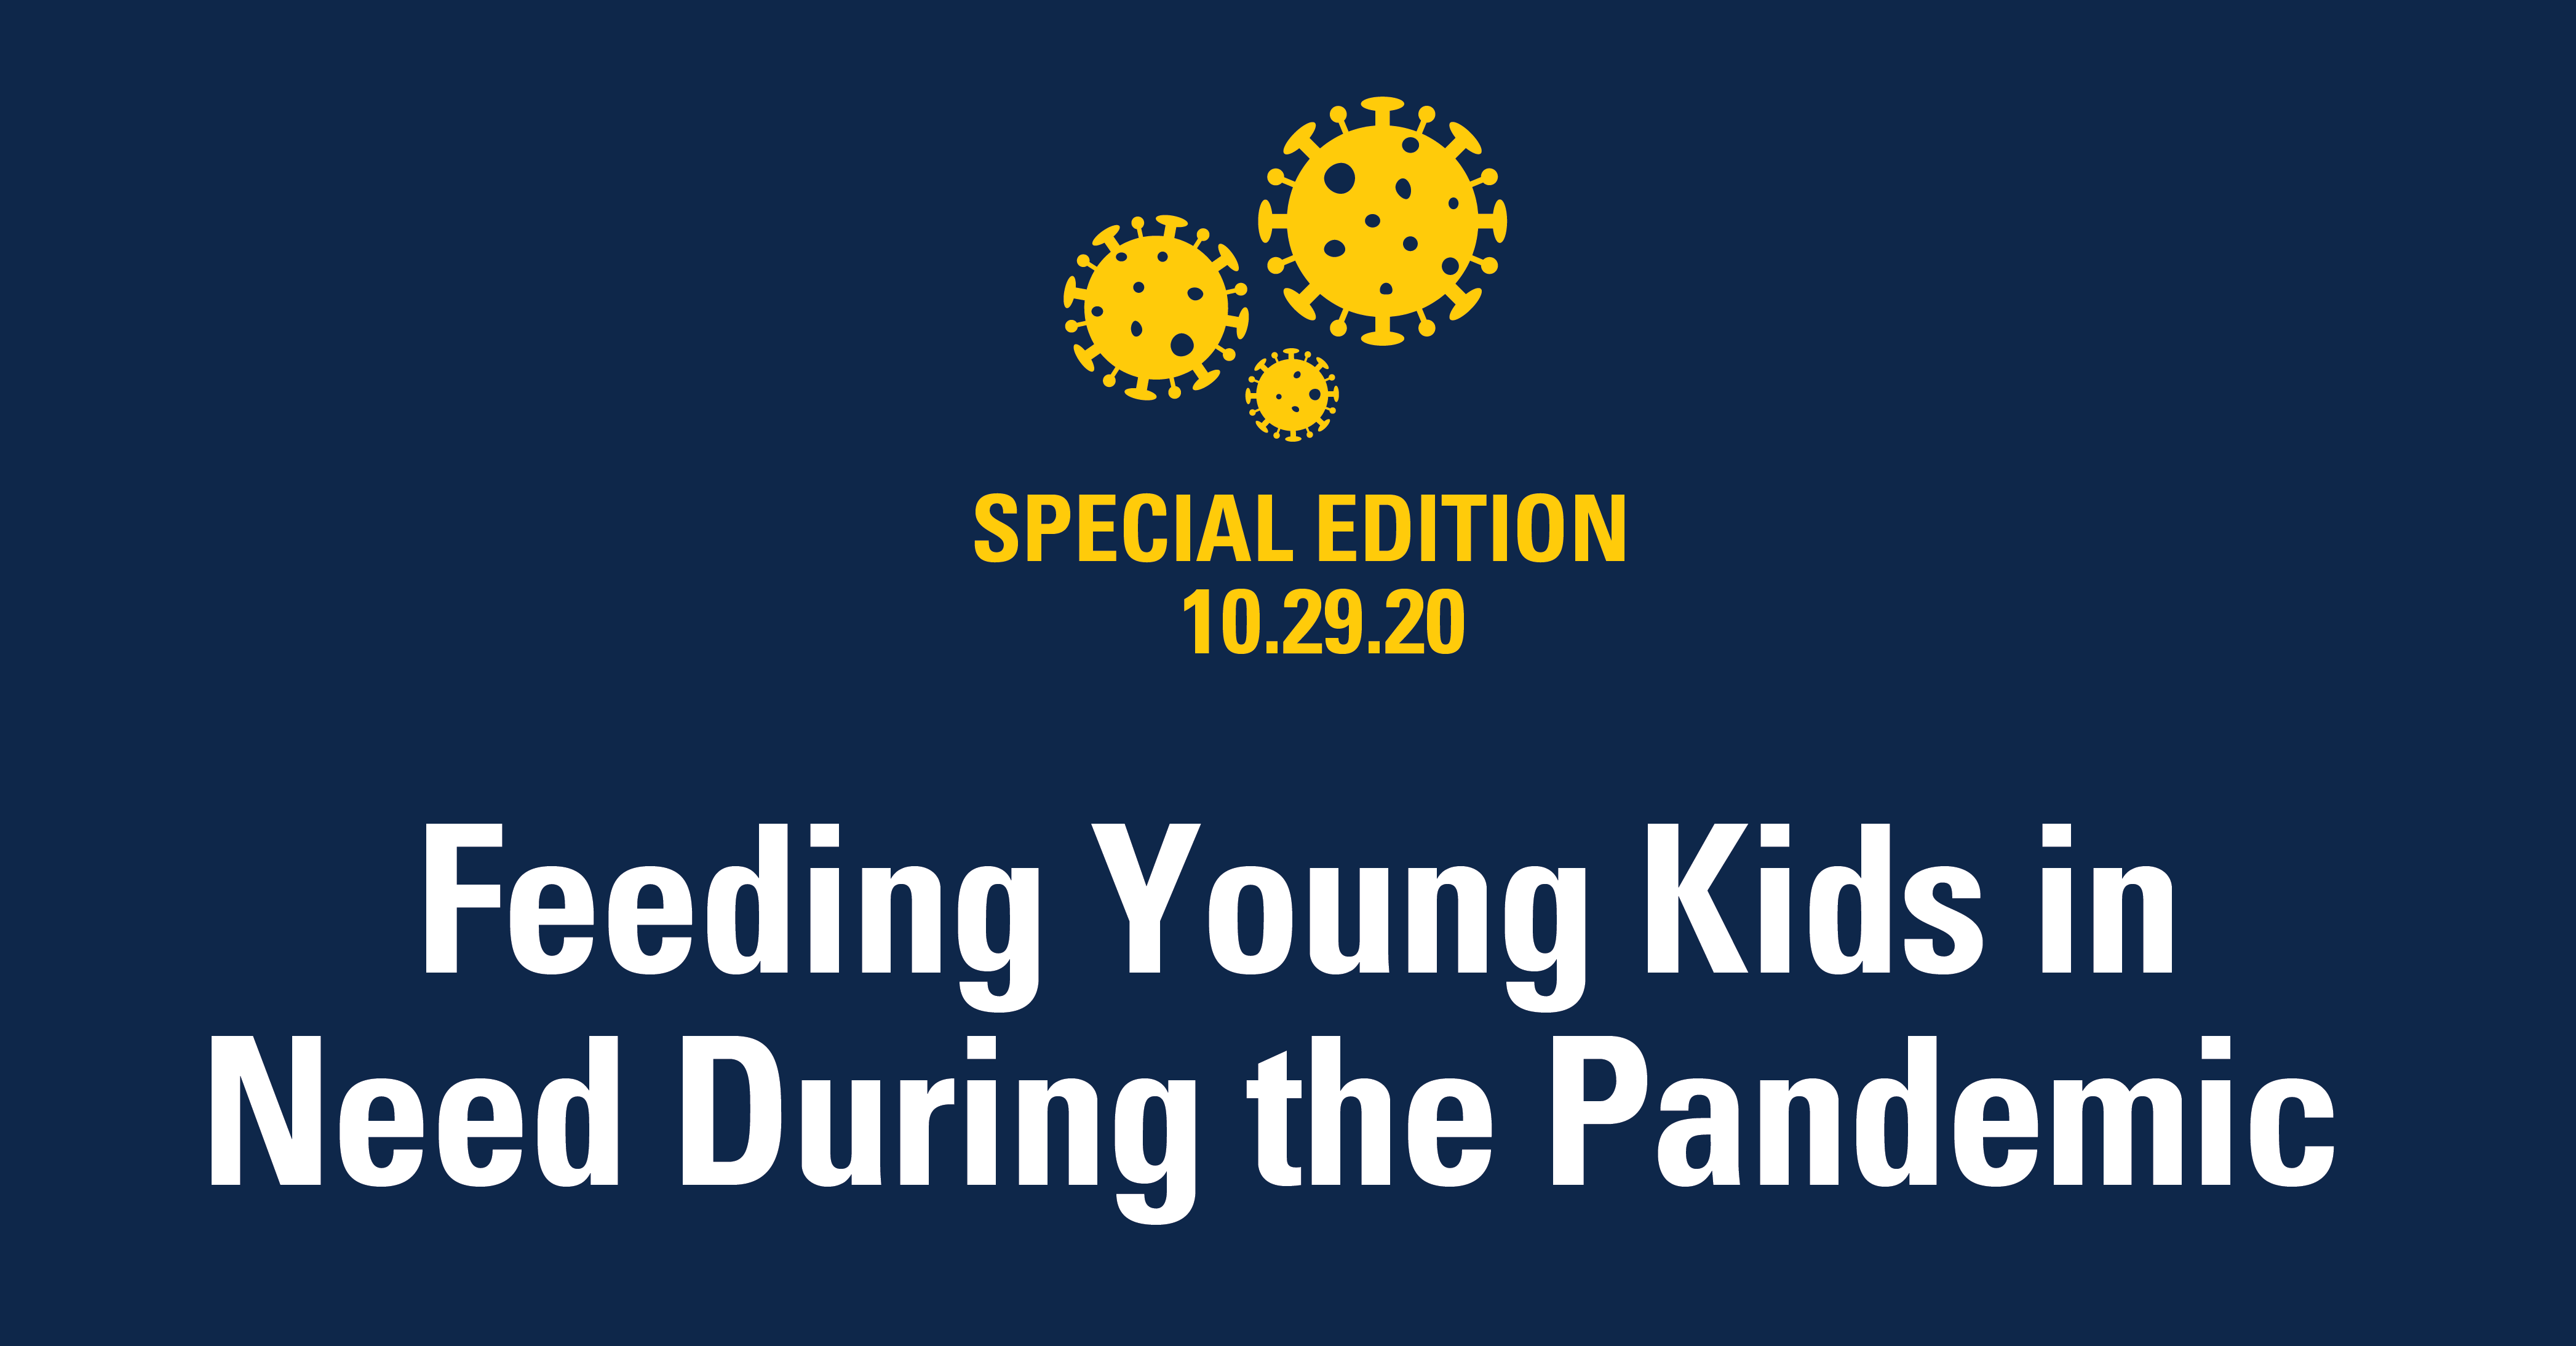 Feeding Younger Kids in Need During the Pandemic